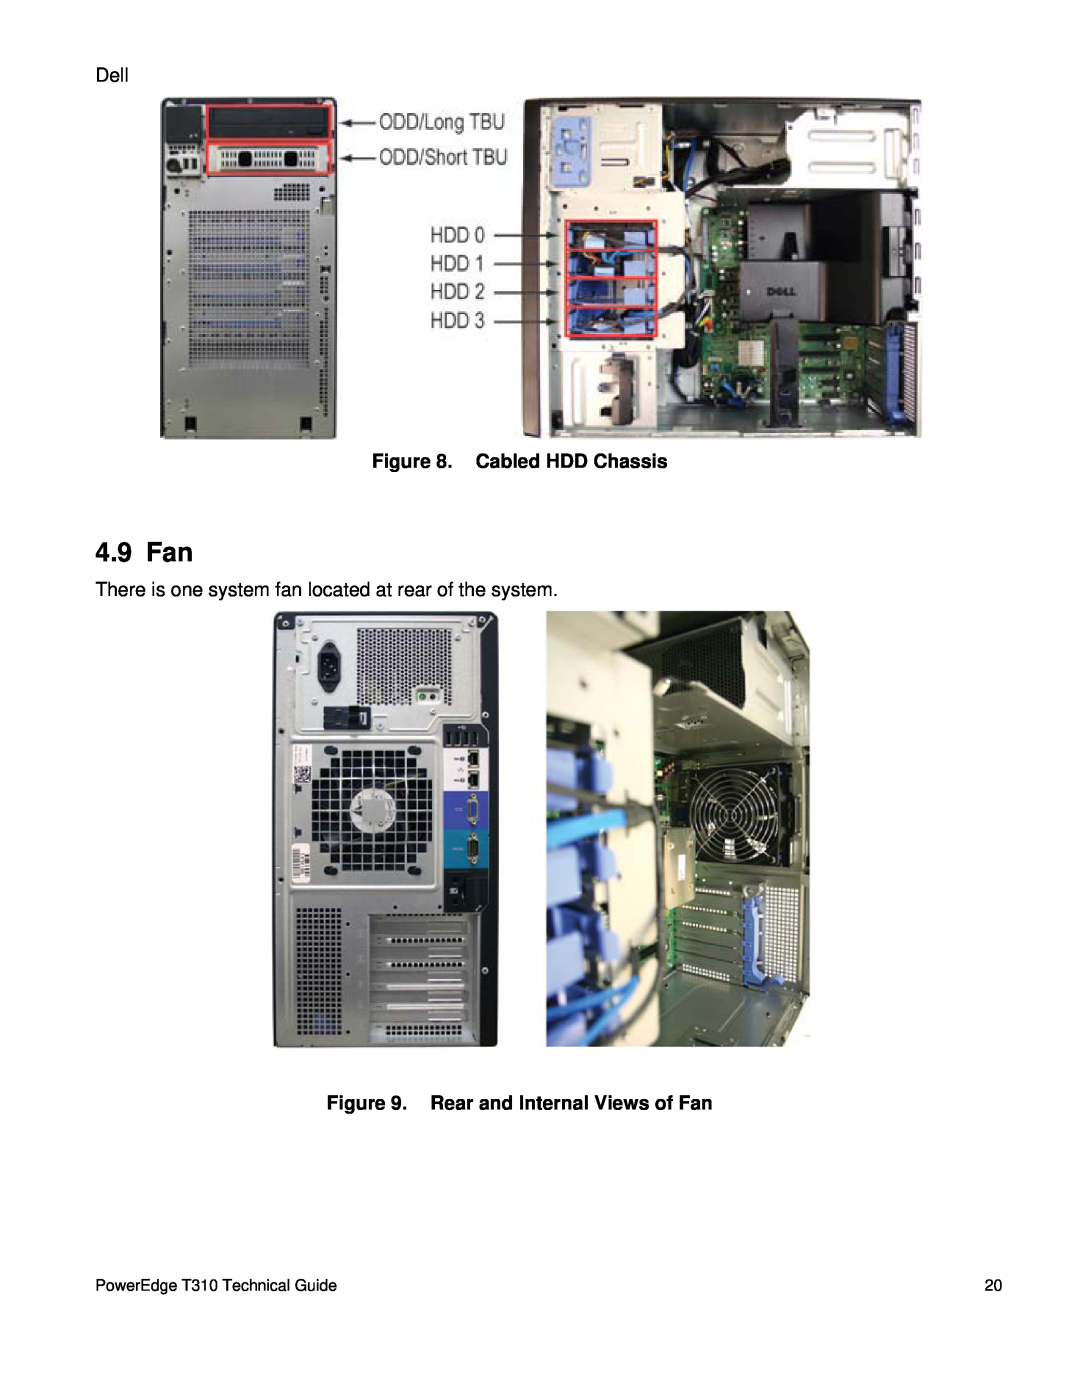 Dell manual 4.9 Fan, Cabled HDD Chassis, Rear and Internal Views of Fan, PowerEdge T310 Technical Guide 